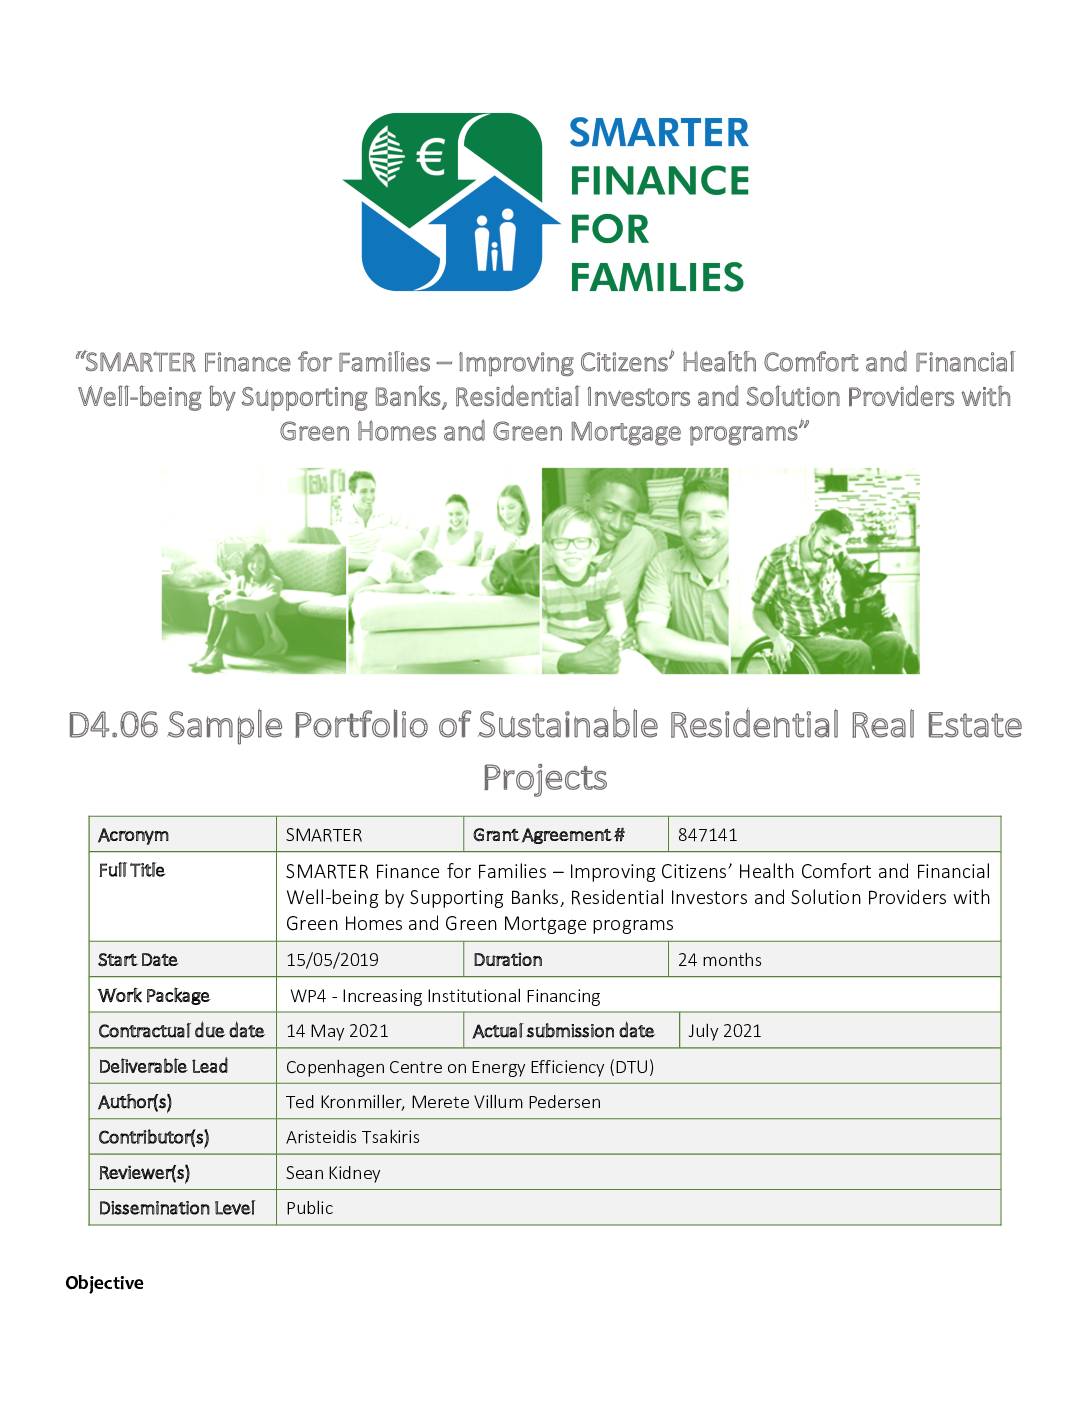 D4.06 Sample Portfolio Report: Sustainable Residential Real Estate Projects